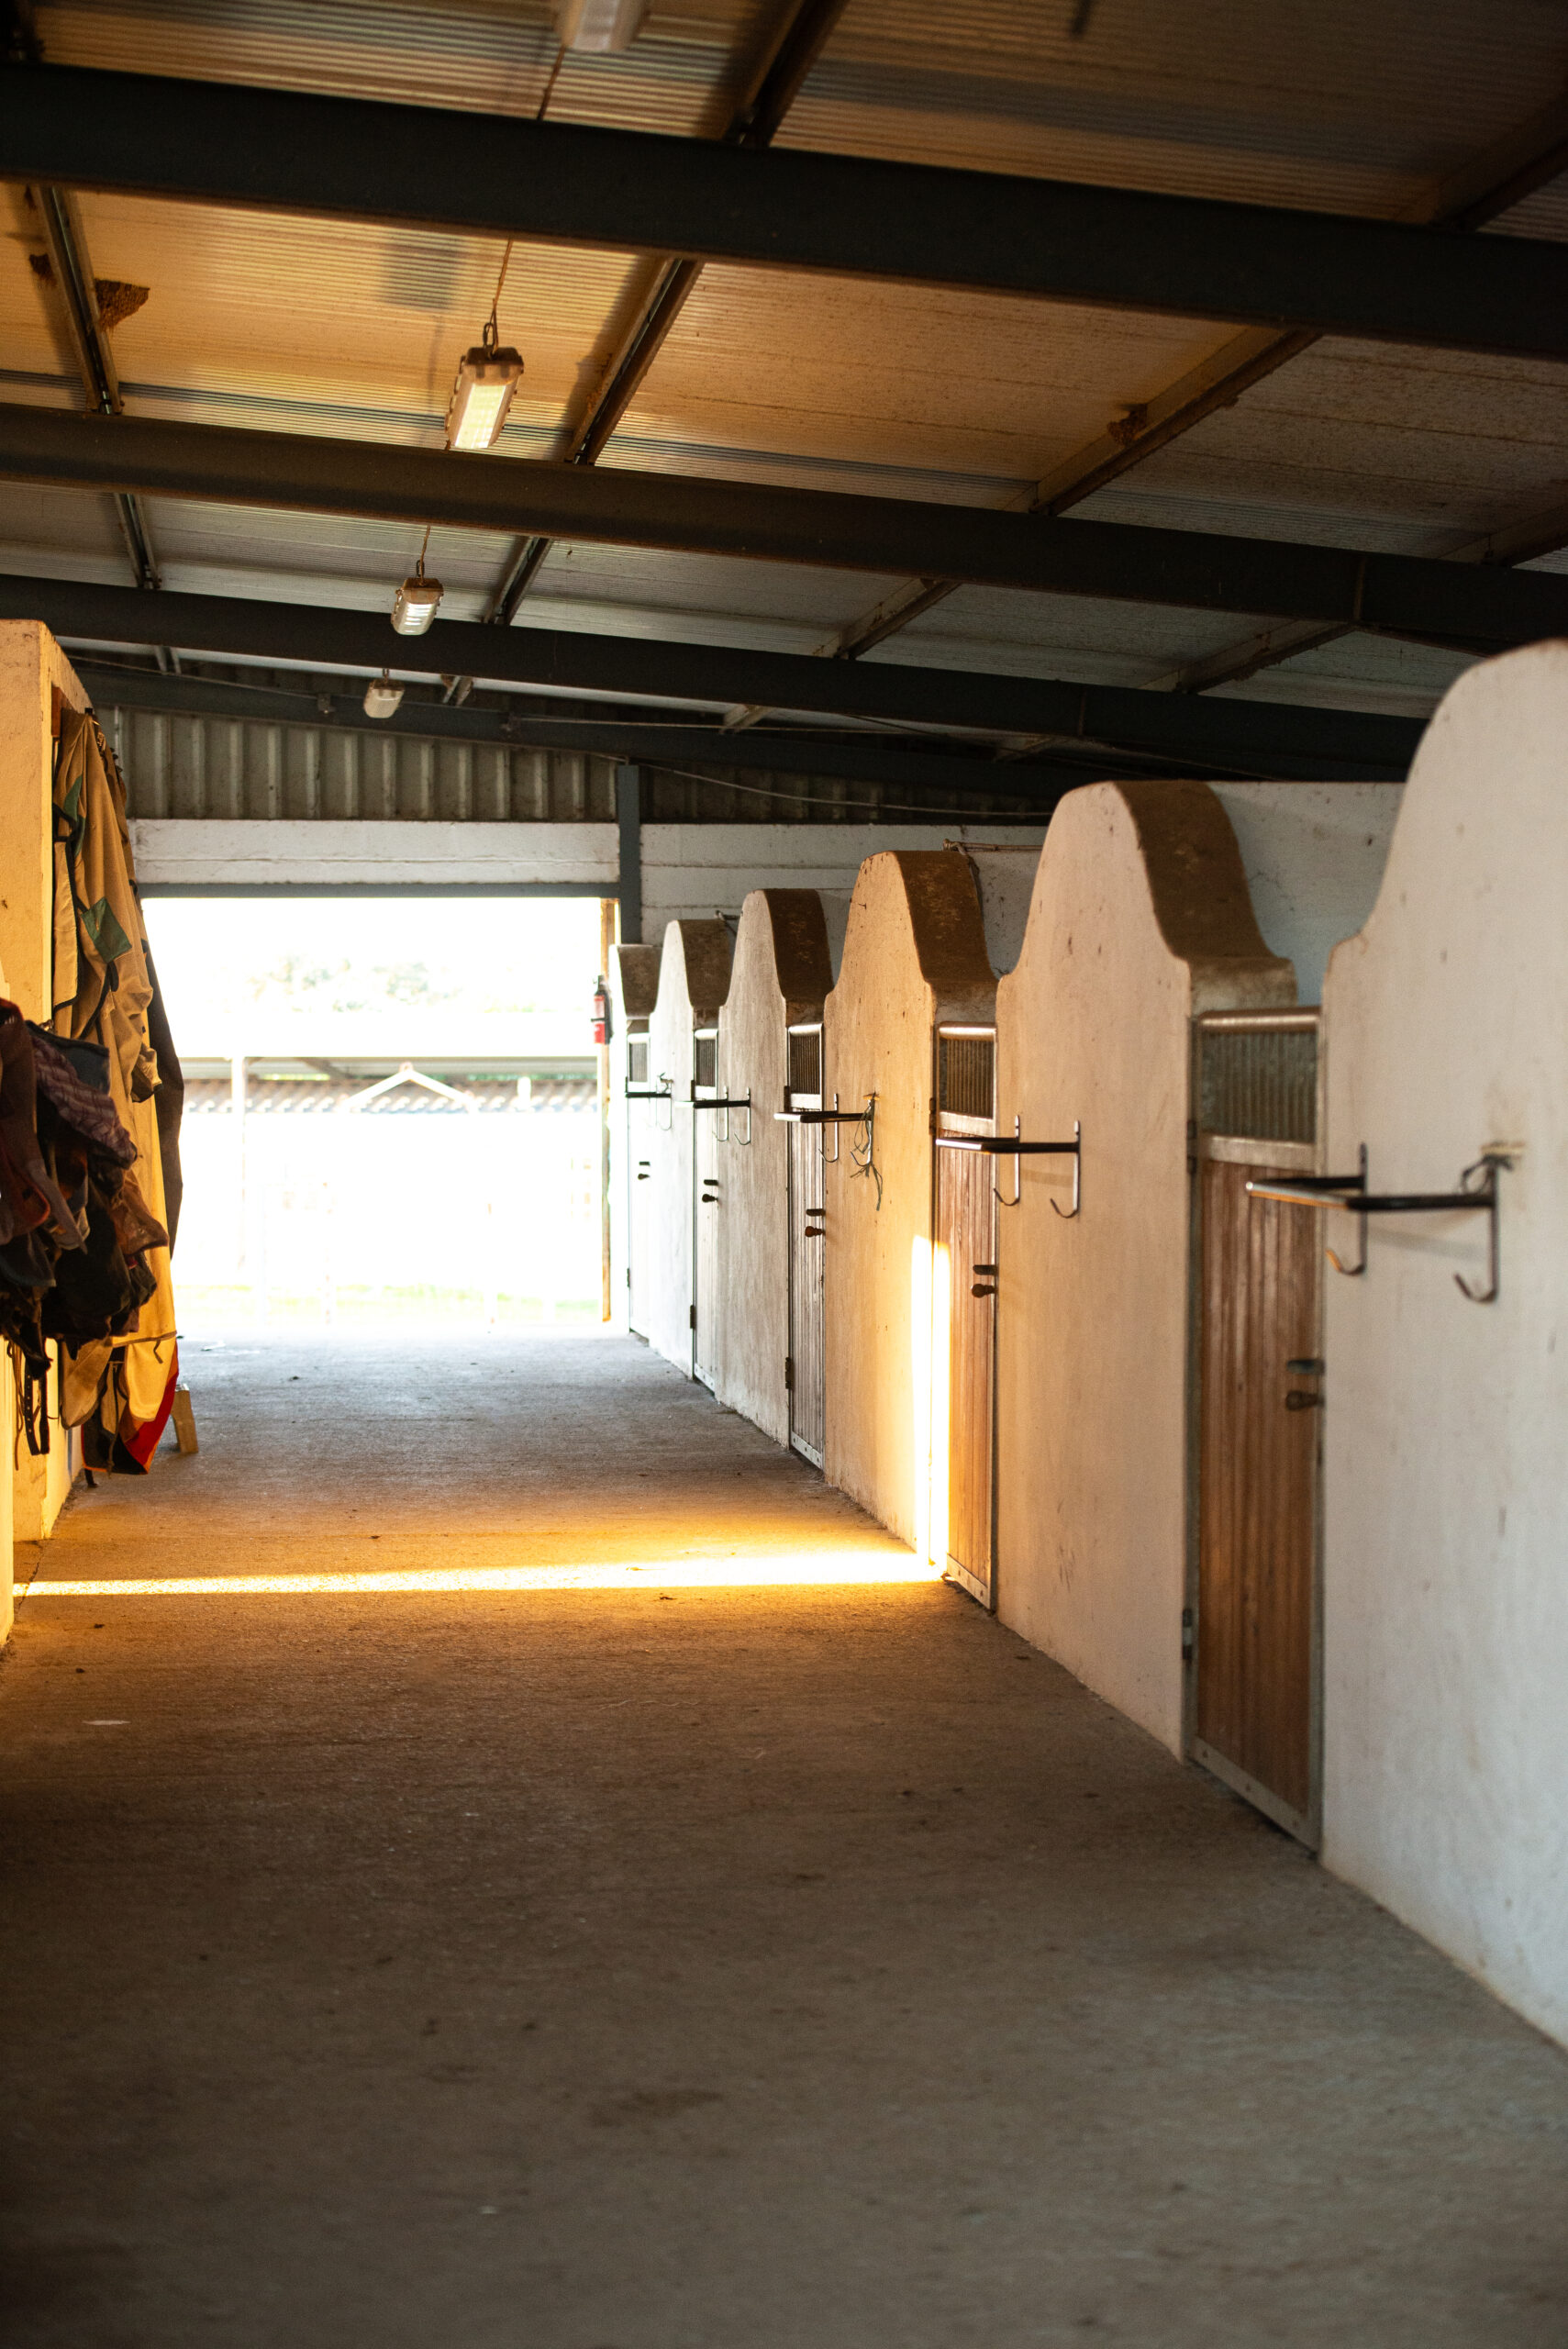 Stable alley with six horse boxes on the right in a brick built American barn in the evening light